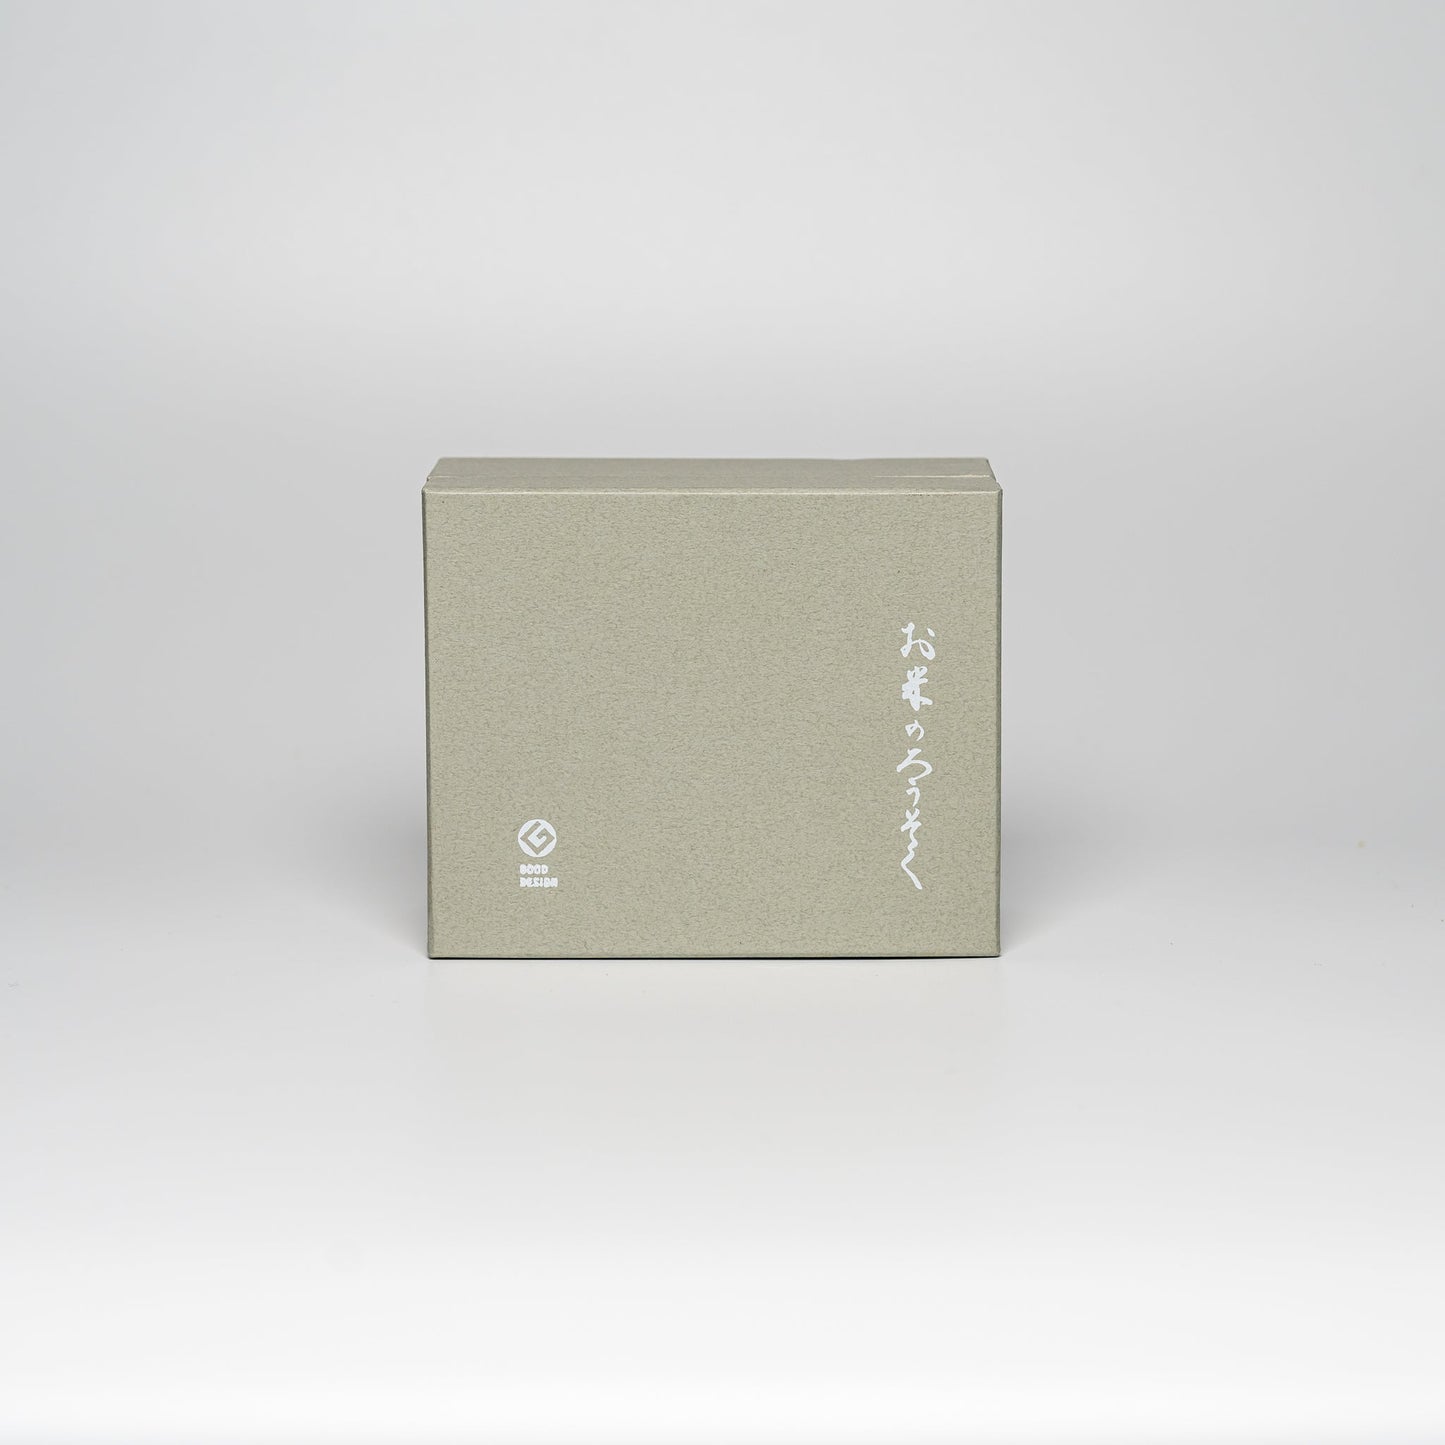 A closed rice wax candle set on a white background